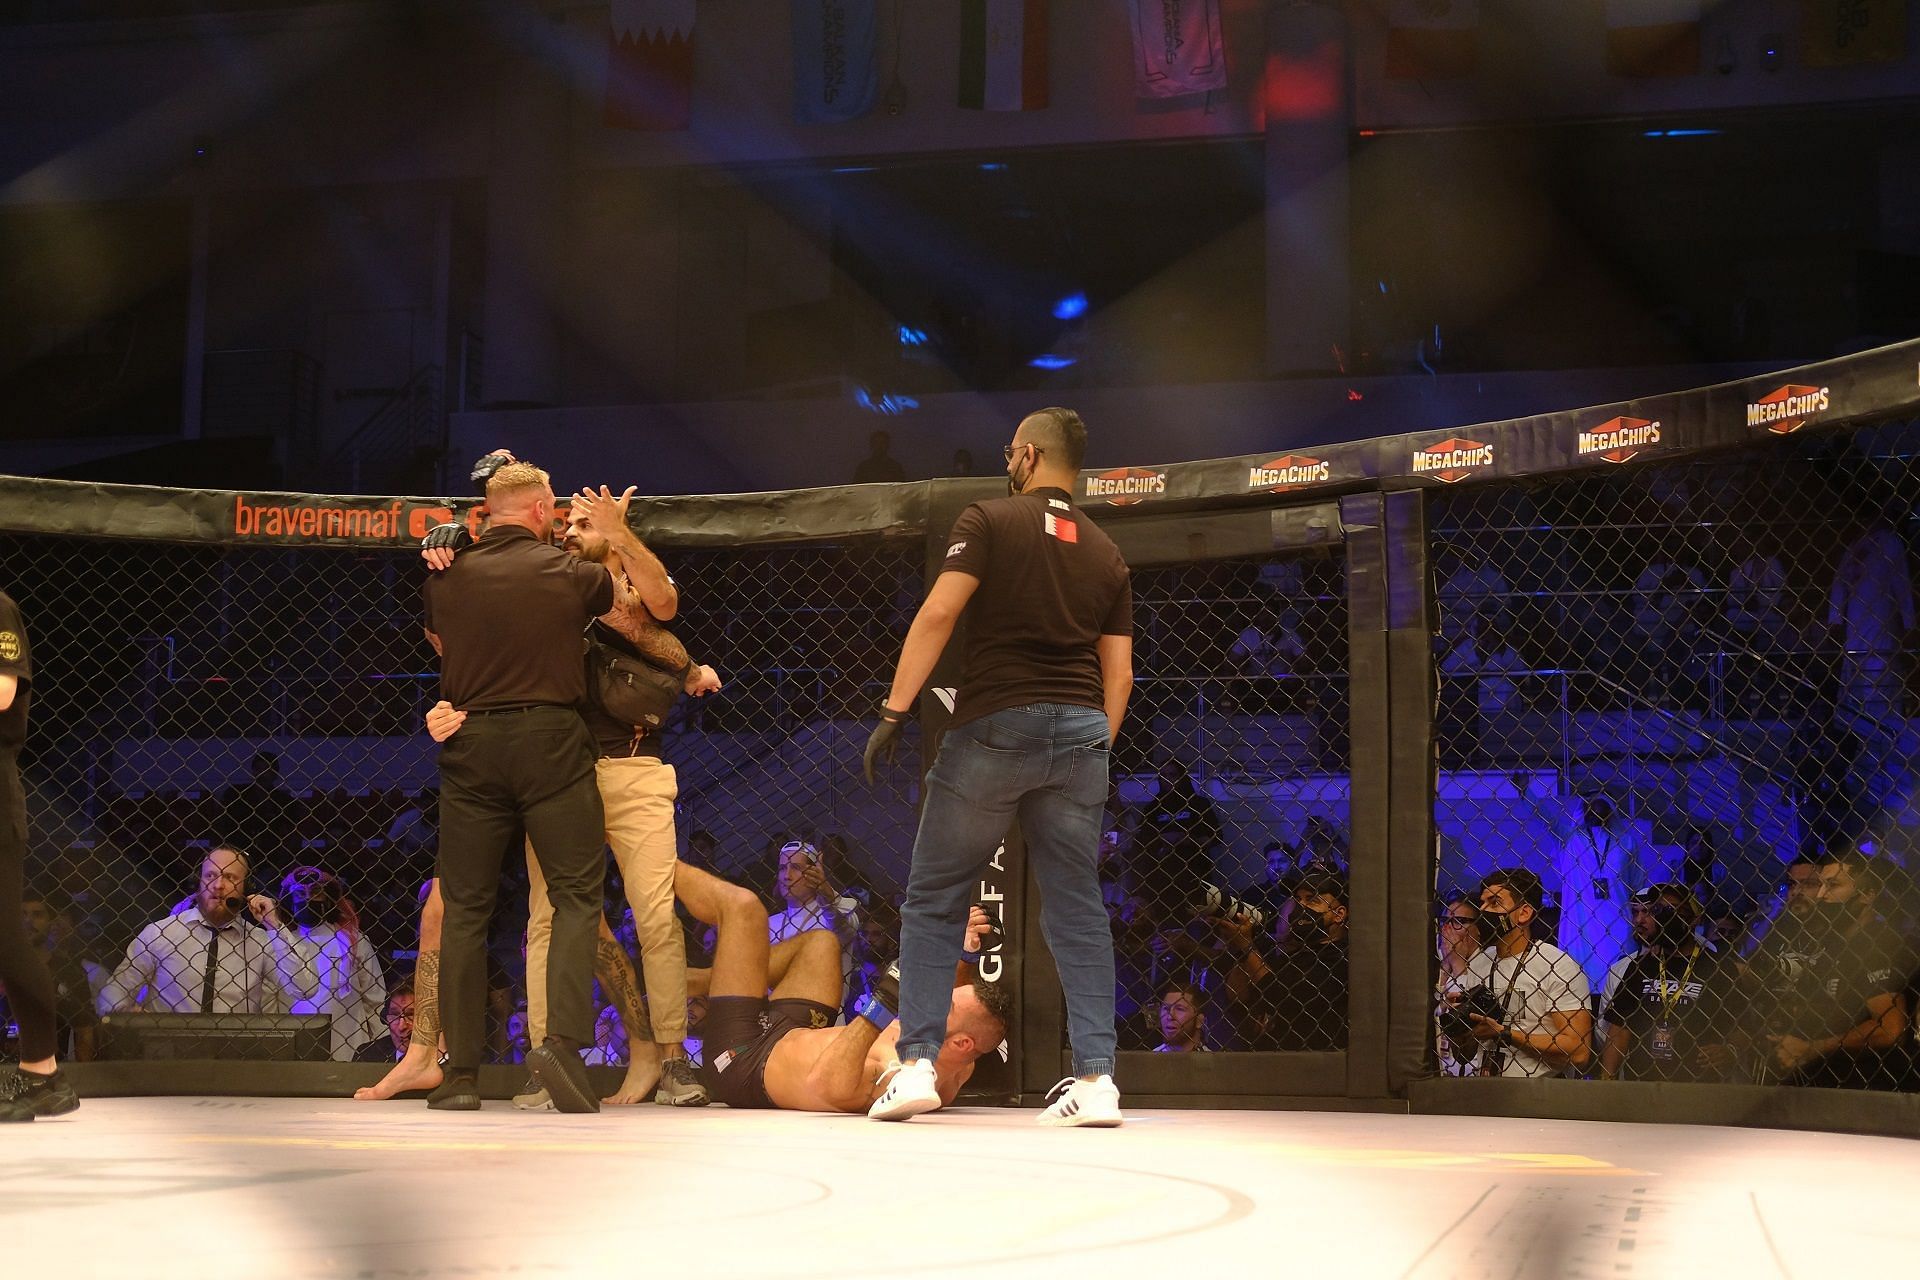 A full-on brawl broke out after the BRAVE CF 57 Co-main event